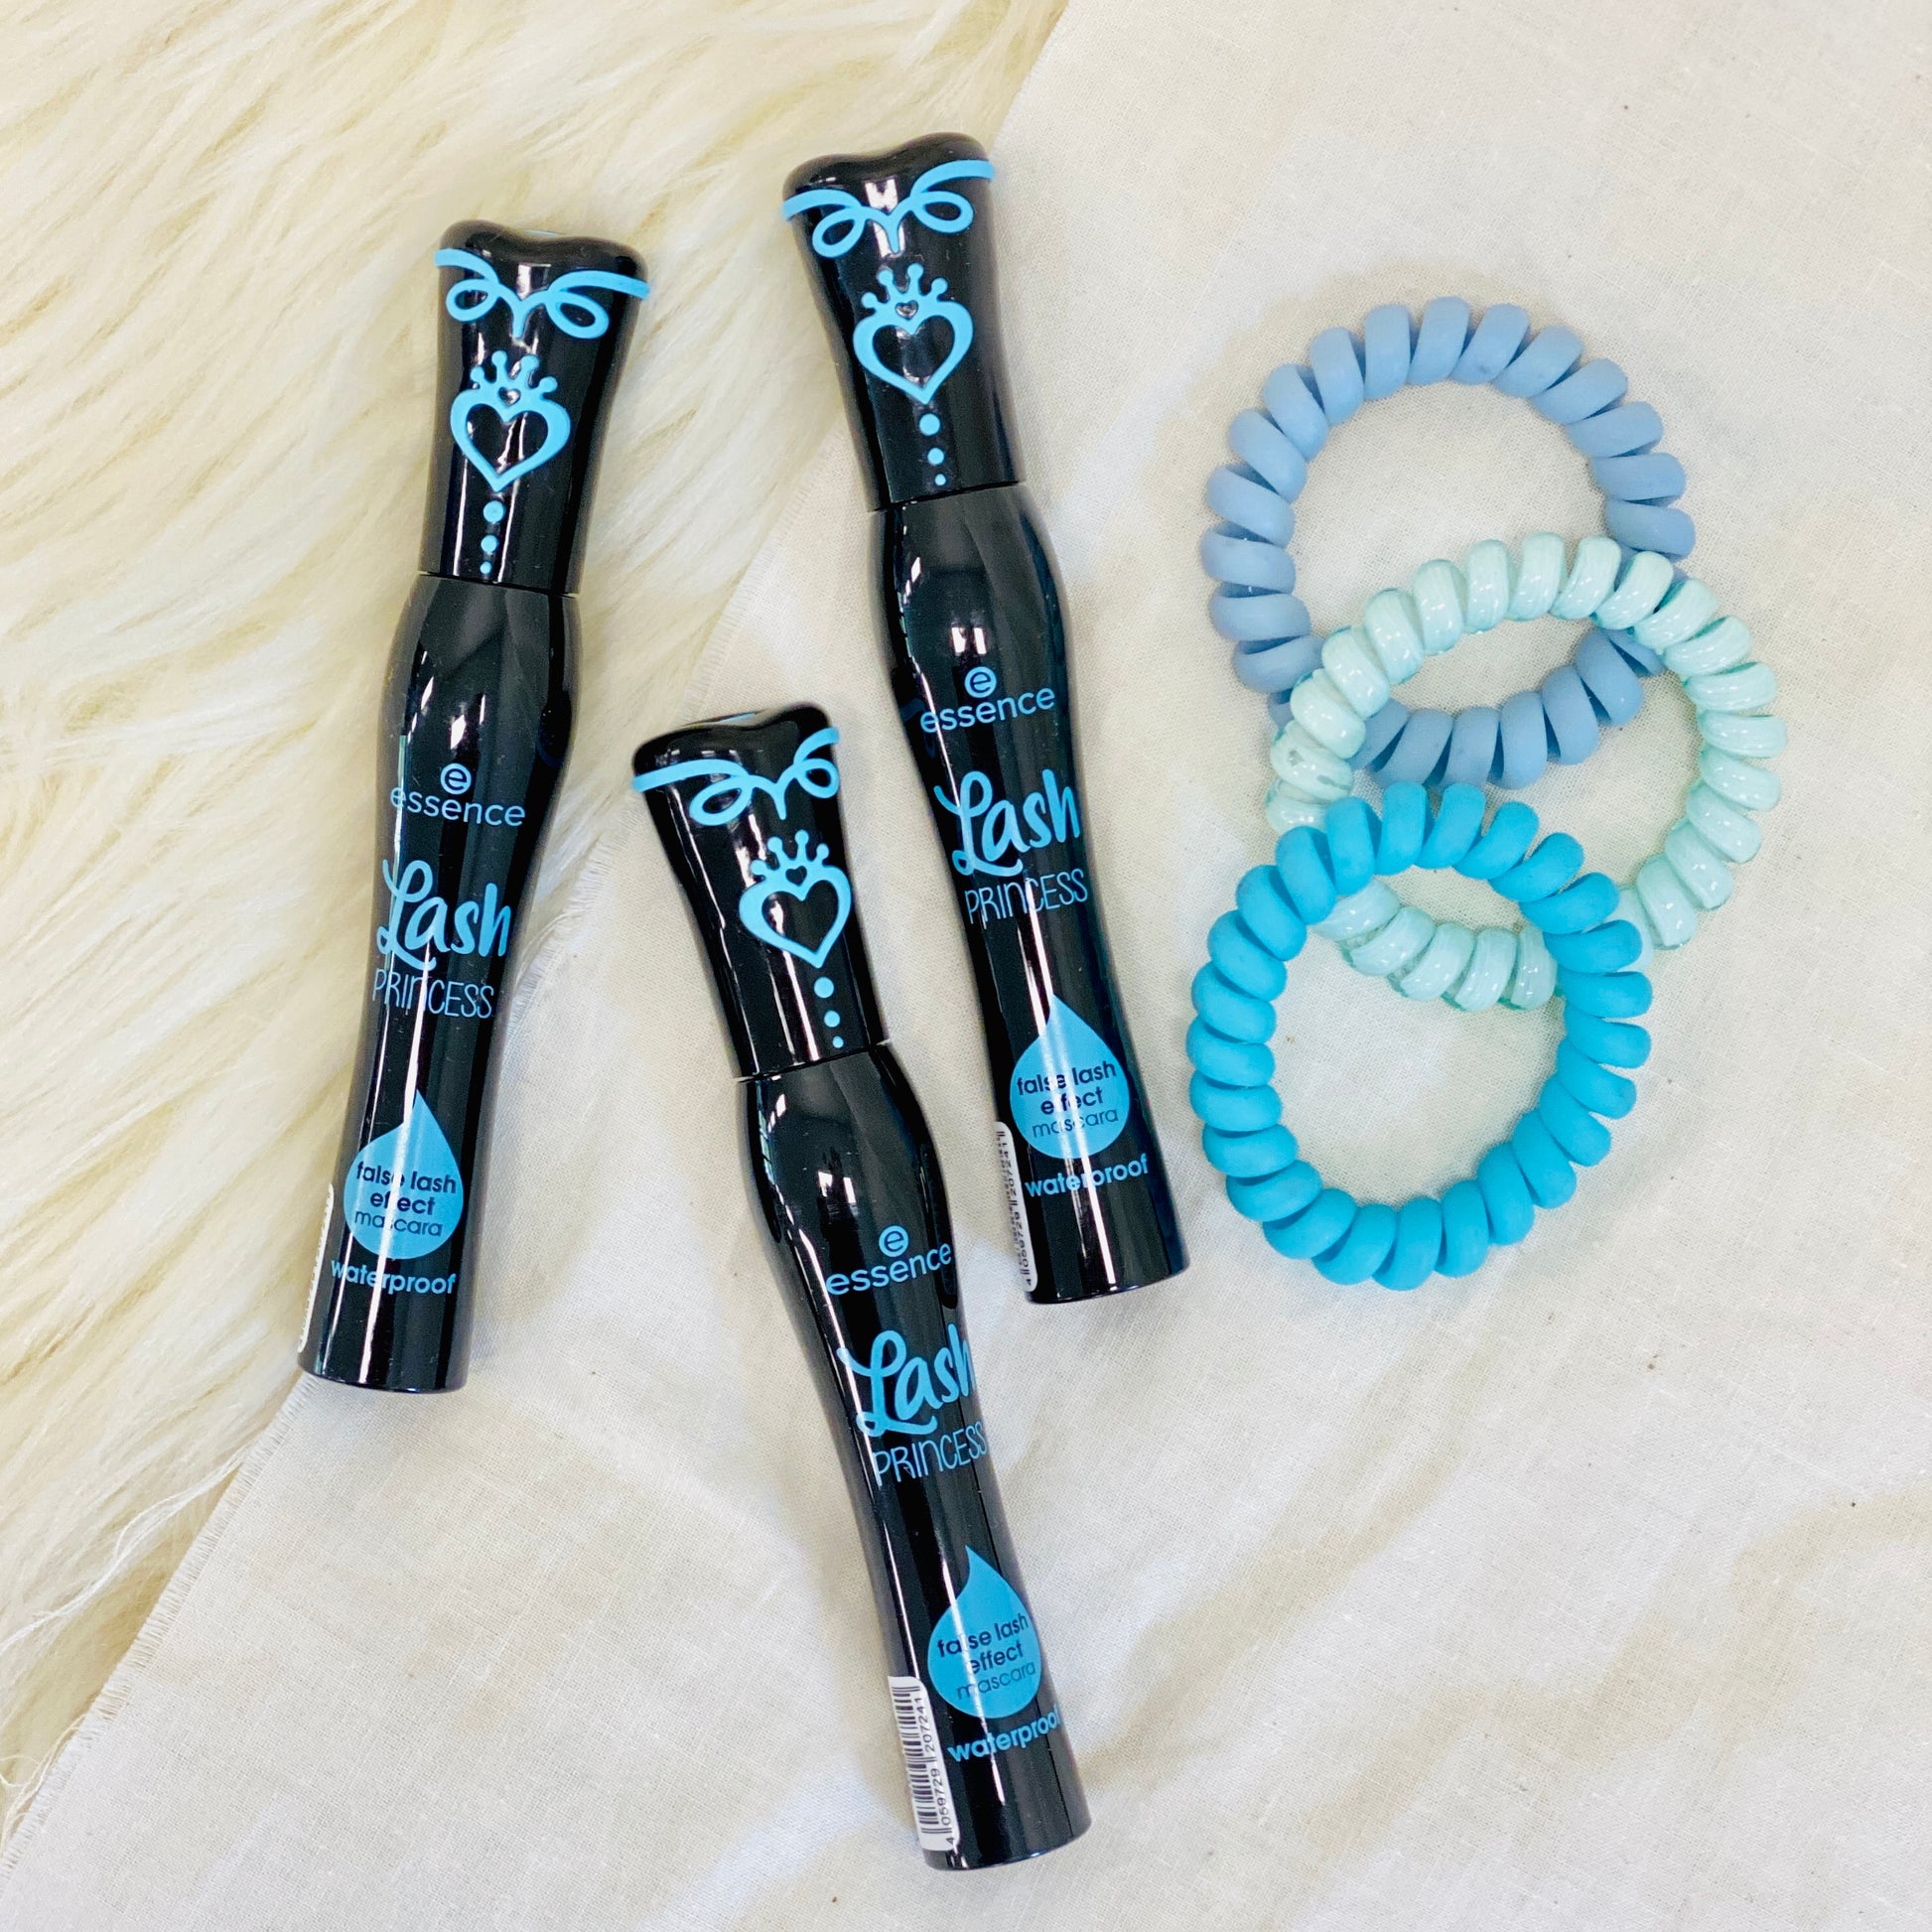 Royal sister is now waterproof! Lash Princess False Lash Effect Waterproof Mascara by Essence gives you voluminous false lash effects of the original in a waterproof formula! The conic shape fiber brush provides lashes with dramatic volume and sculpted length. Ophthalmologically tested. No Animal Testing & Paraben Free